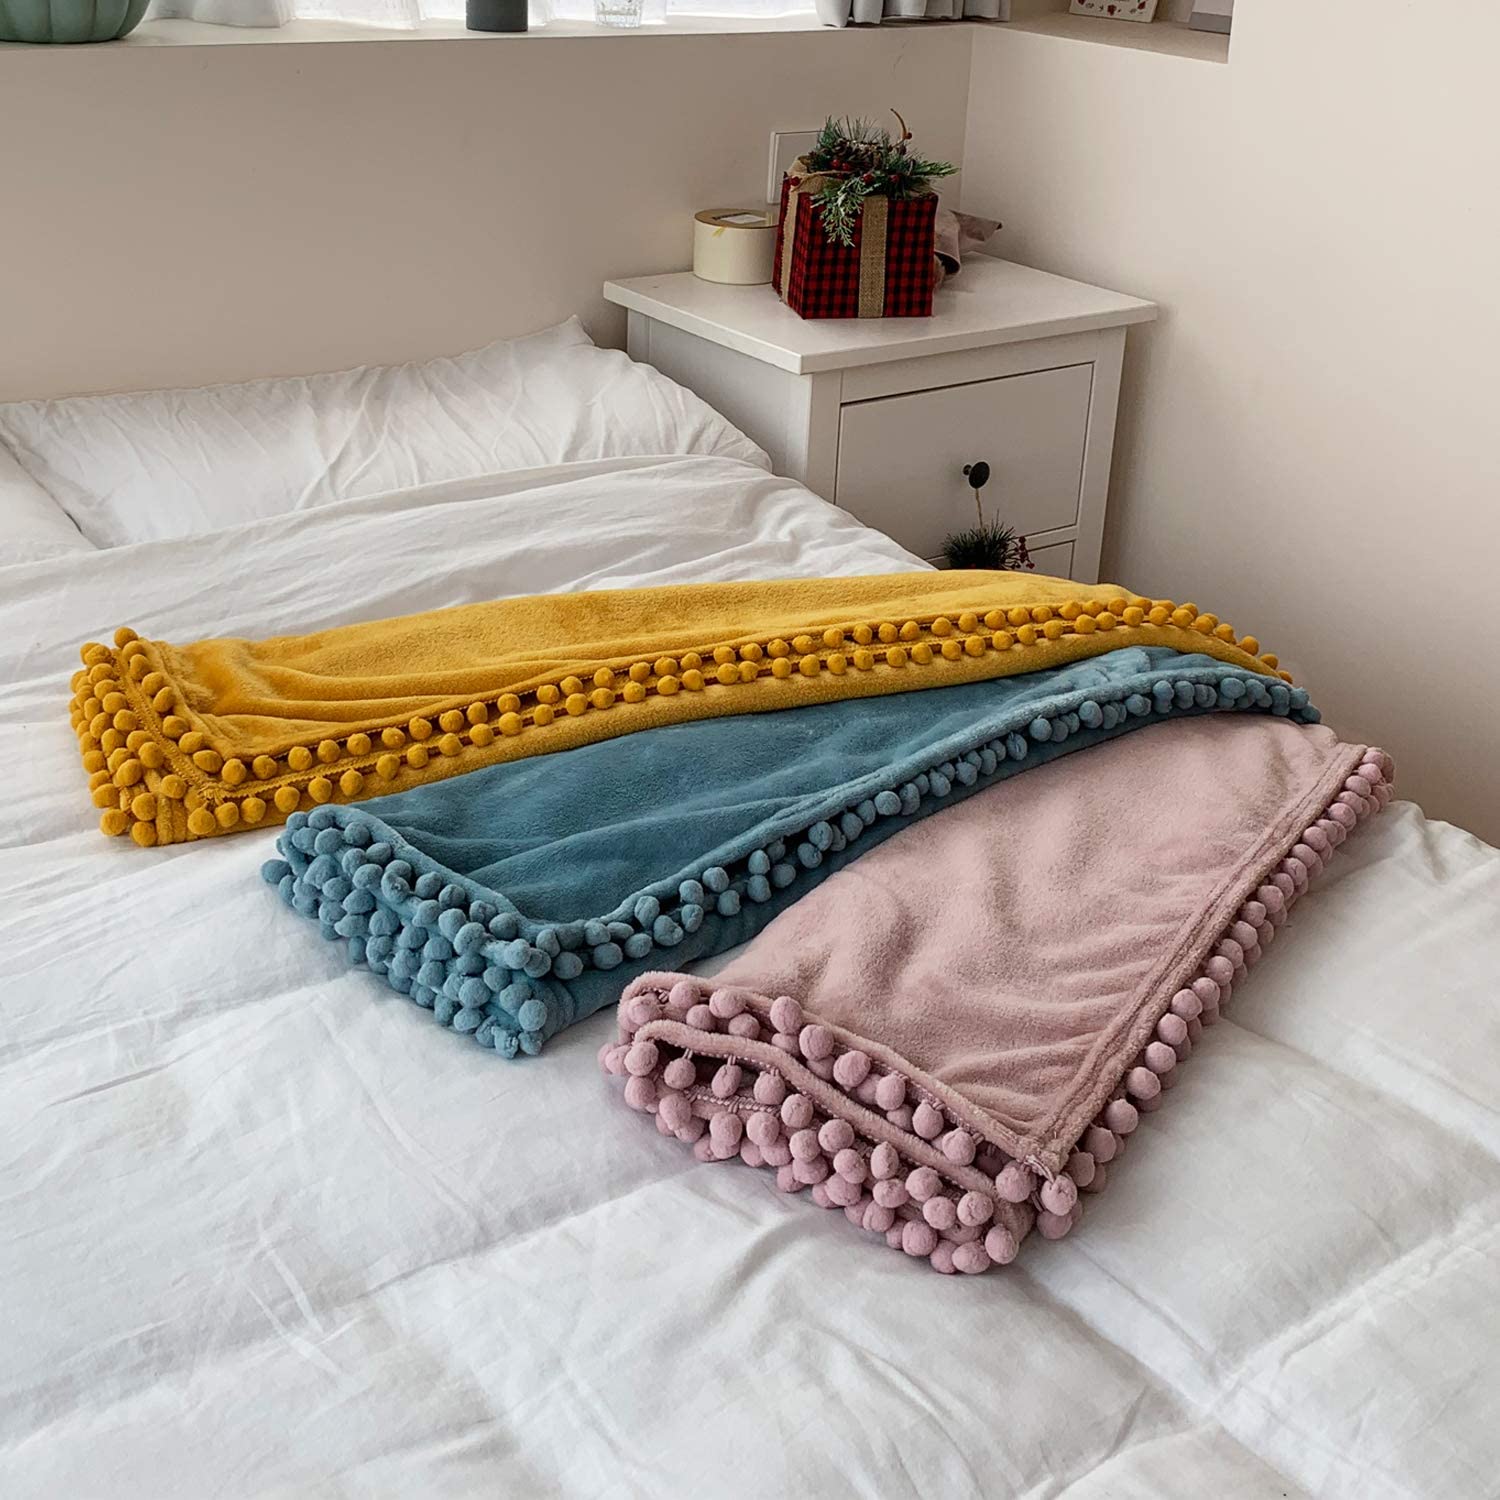 The 12 Best Throw Blankets To Stay Cozy This Winter | HomeIdeas